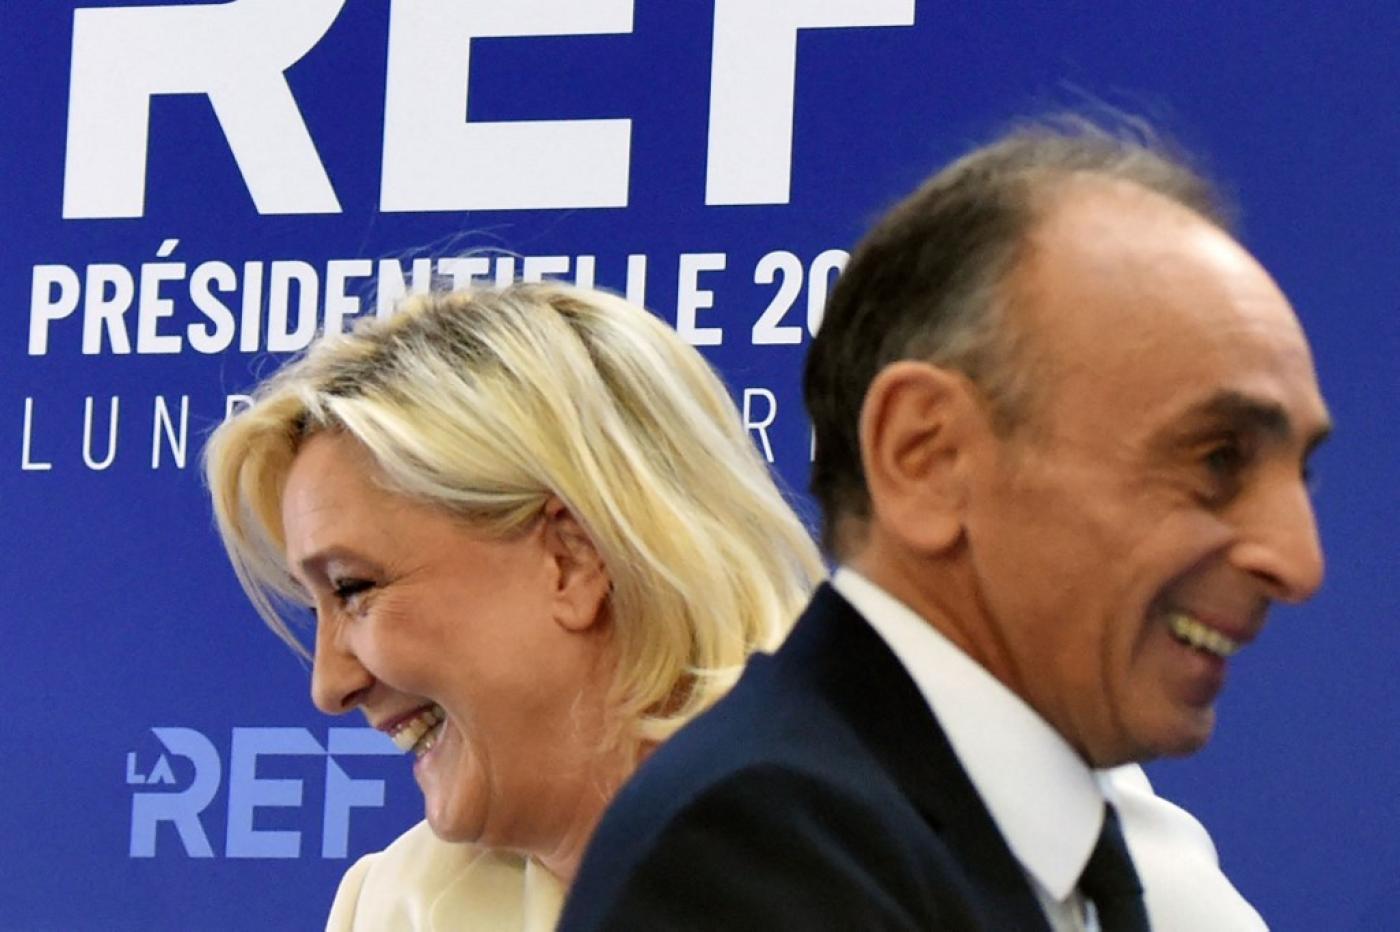 French presidential candidates Eric Zemmour and Marine Le Pen pass each other in Paris on 21 February 2022 (AFP)